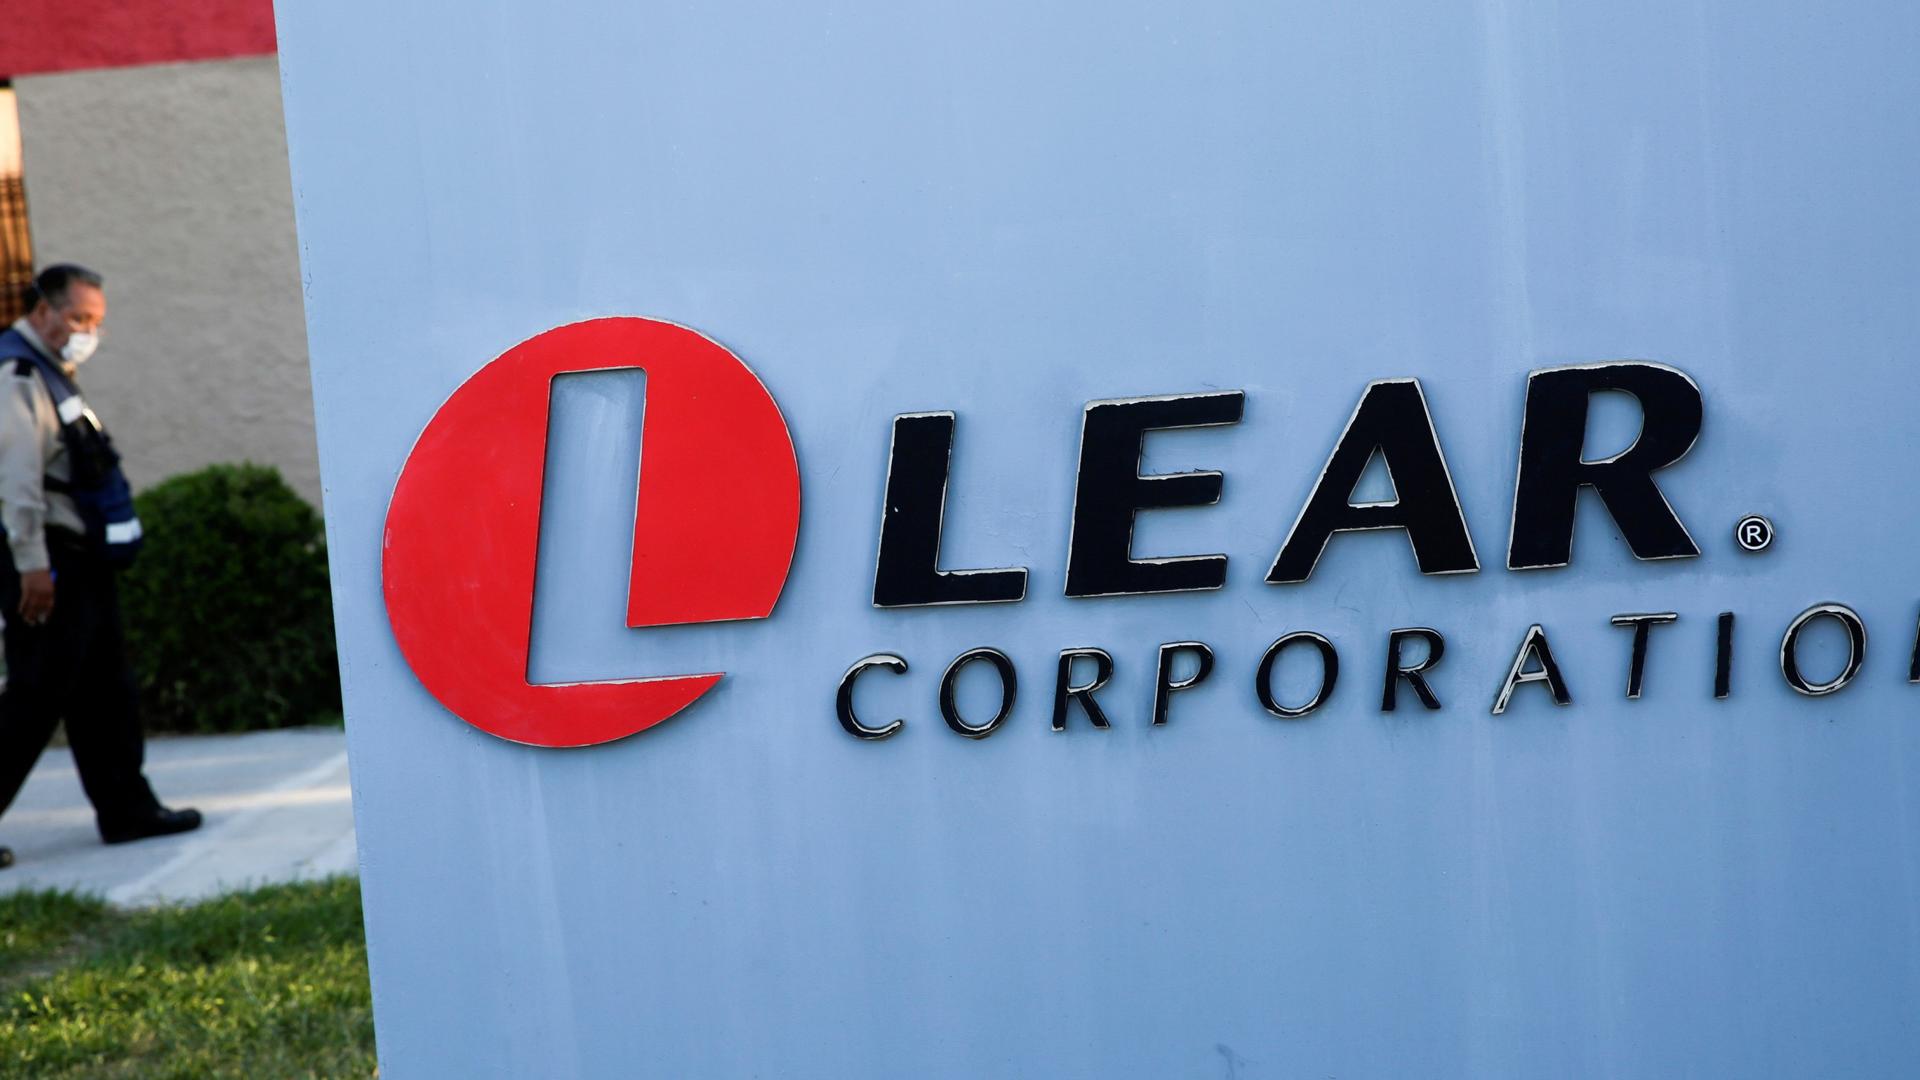 The logo of Lear Corporation, a Michigan-based car seat maker, near a man walking with a face mask